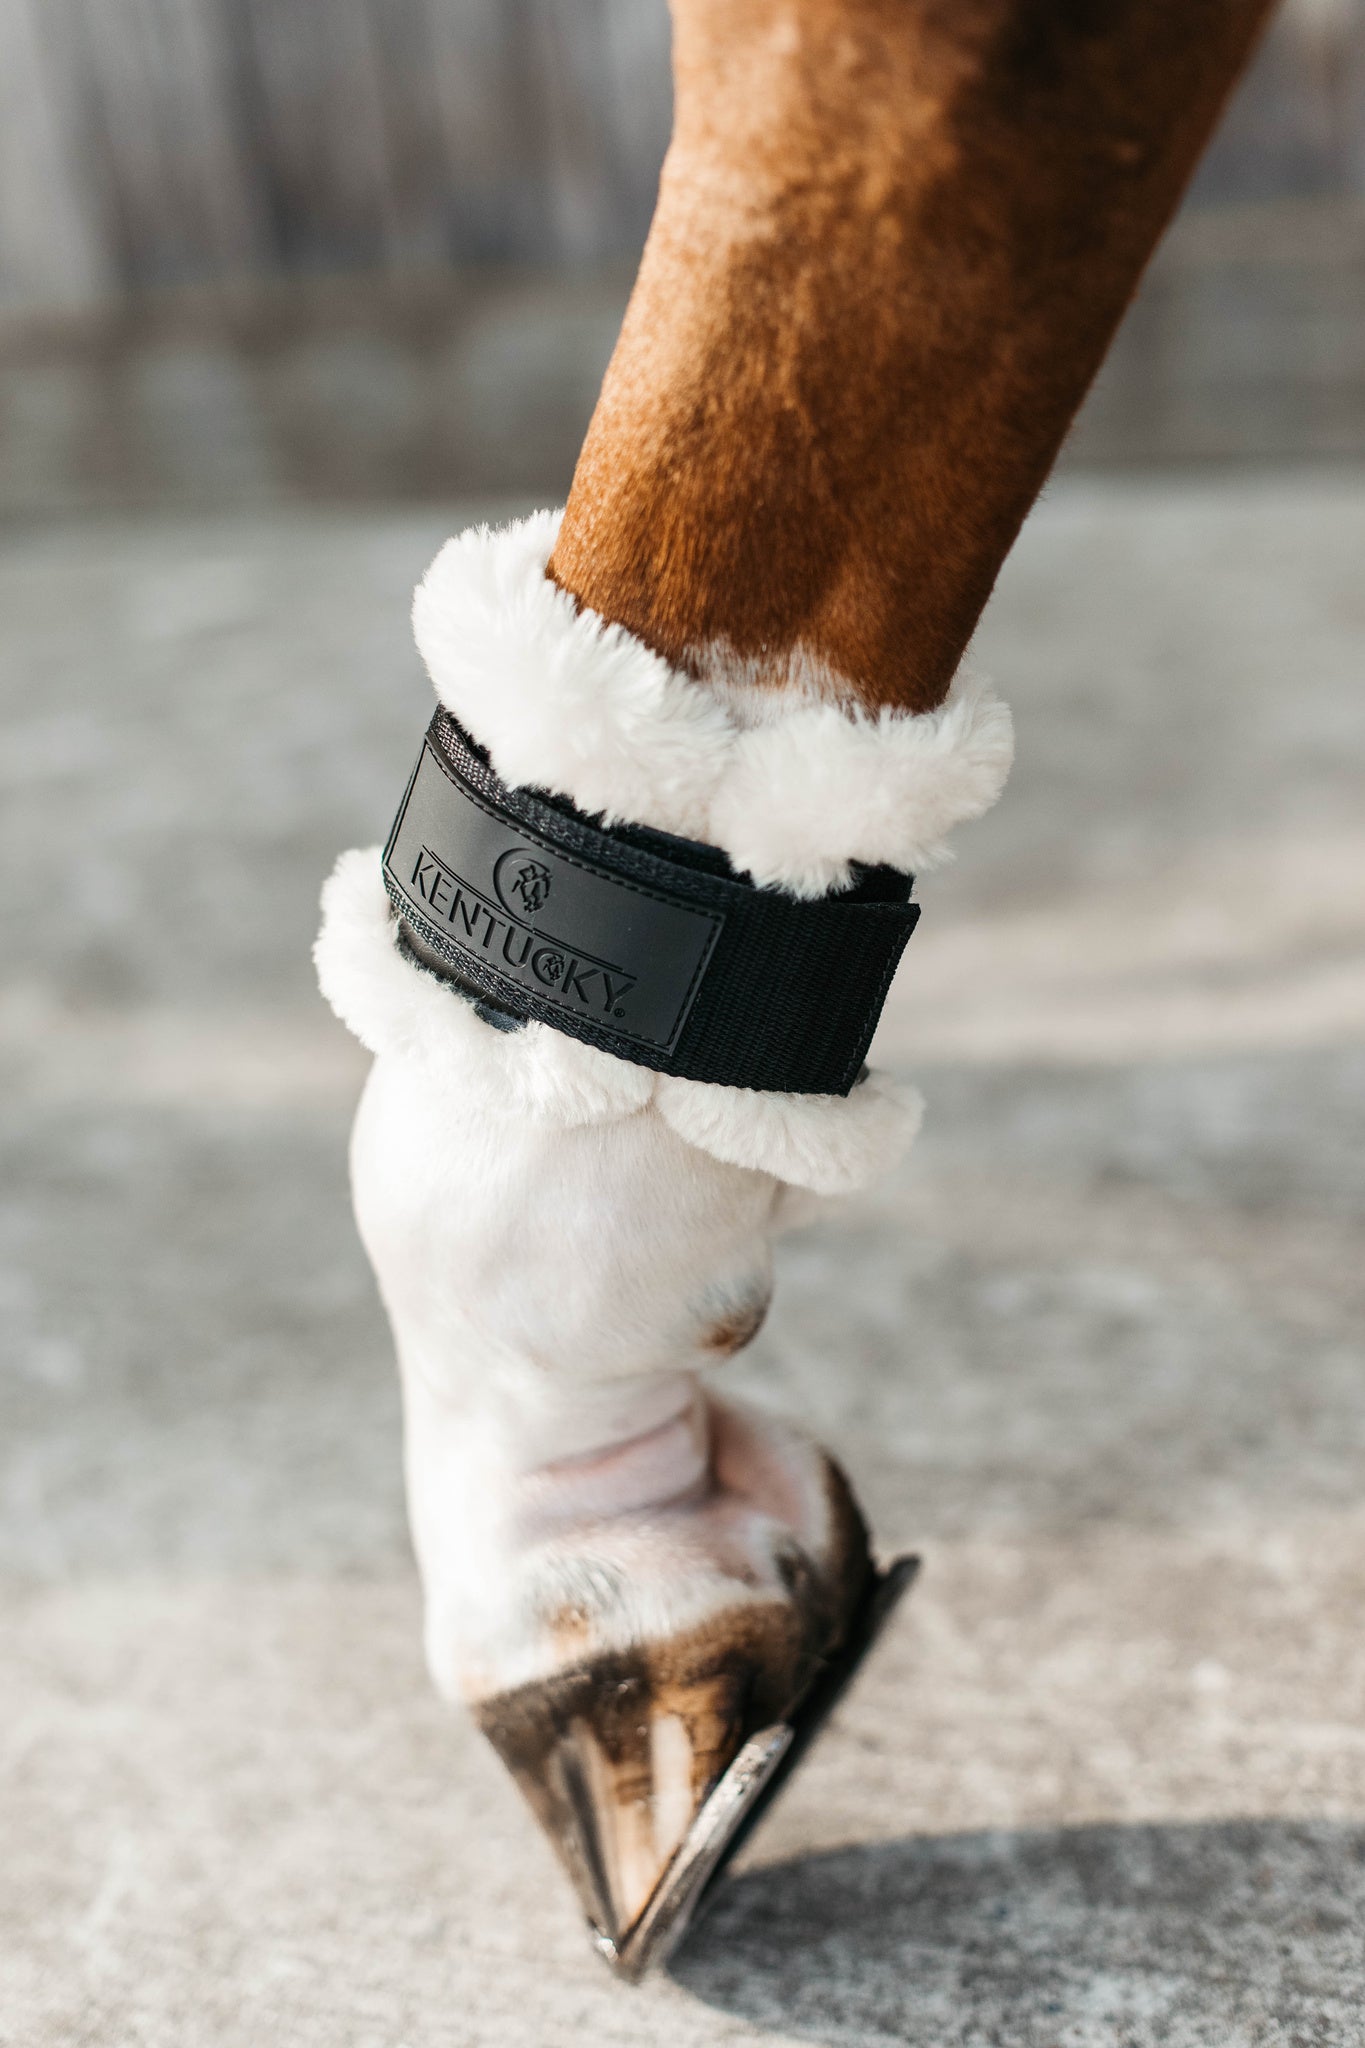 Kentucky Sheepskin Young Horse Fetlock Boots Air are the perfect match for the New Kentucky Tendon Boots Bamboo Shield. 